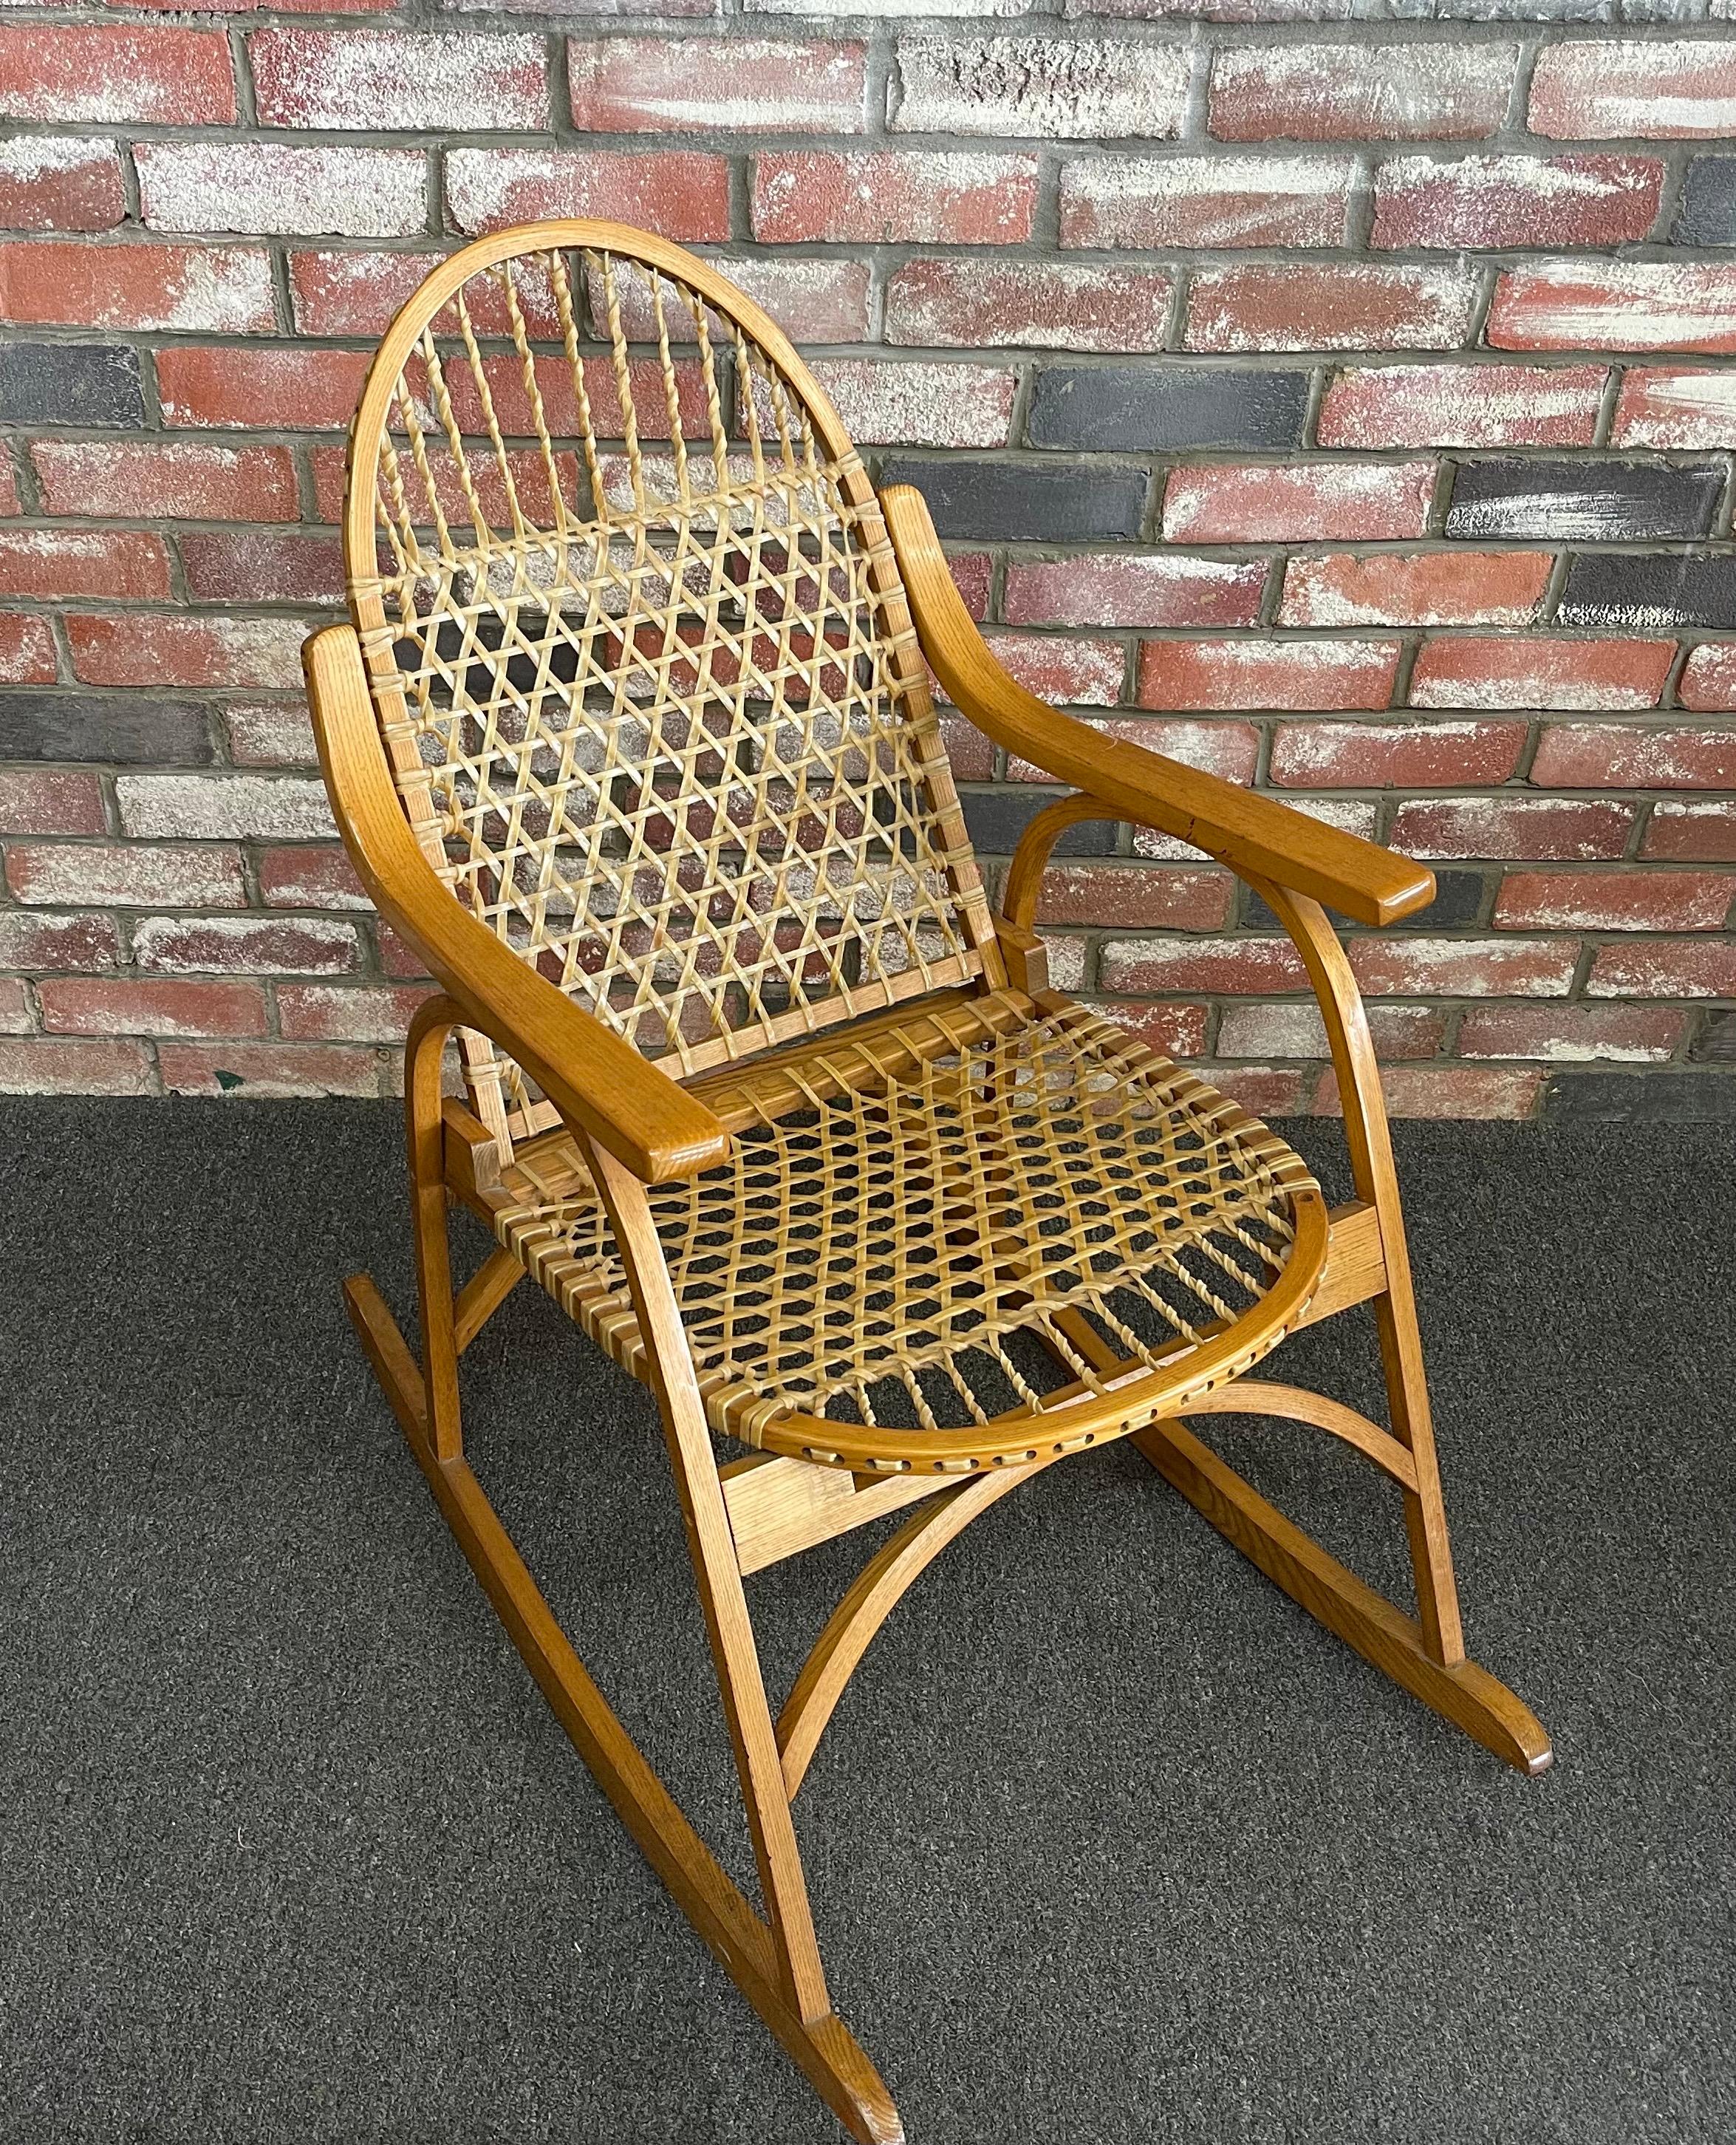 Vintage snowshoe oak & rawhide rocking chair by Vermont Tubbs, circa 1960s. The rocker is very sturdy and is in good vintage condition with no cracks or breaks to the rawhide. Super cool piece! #1674

Dimensions: 34.25